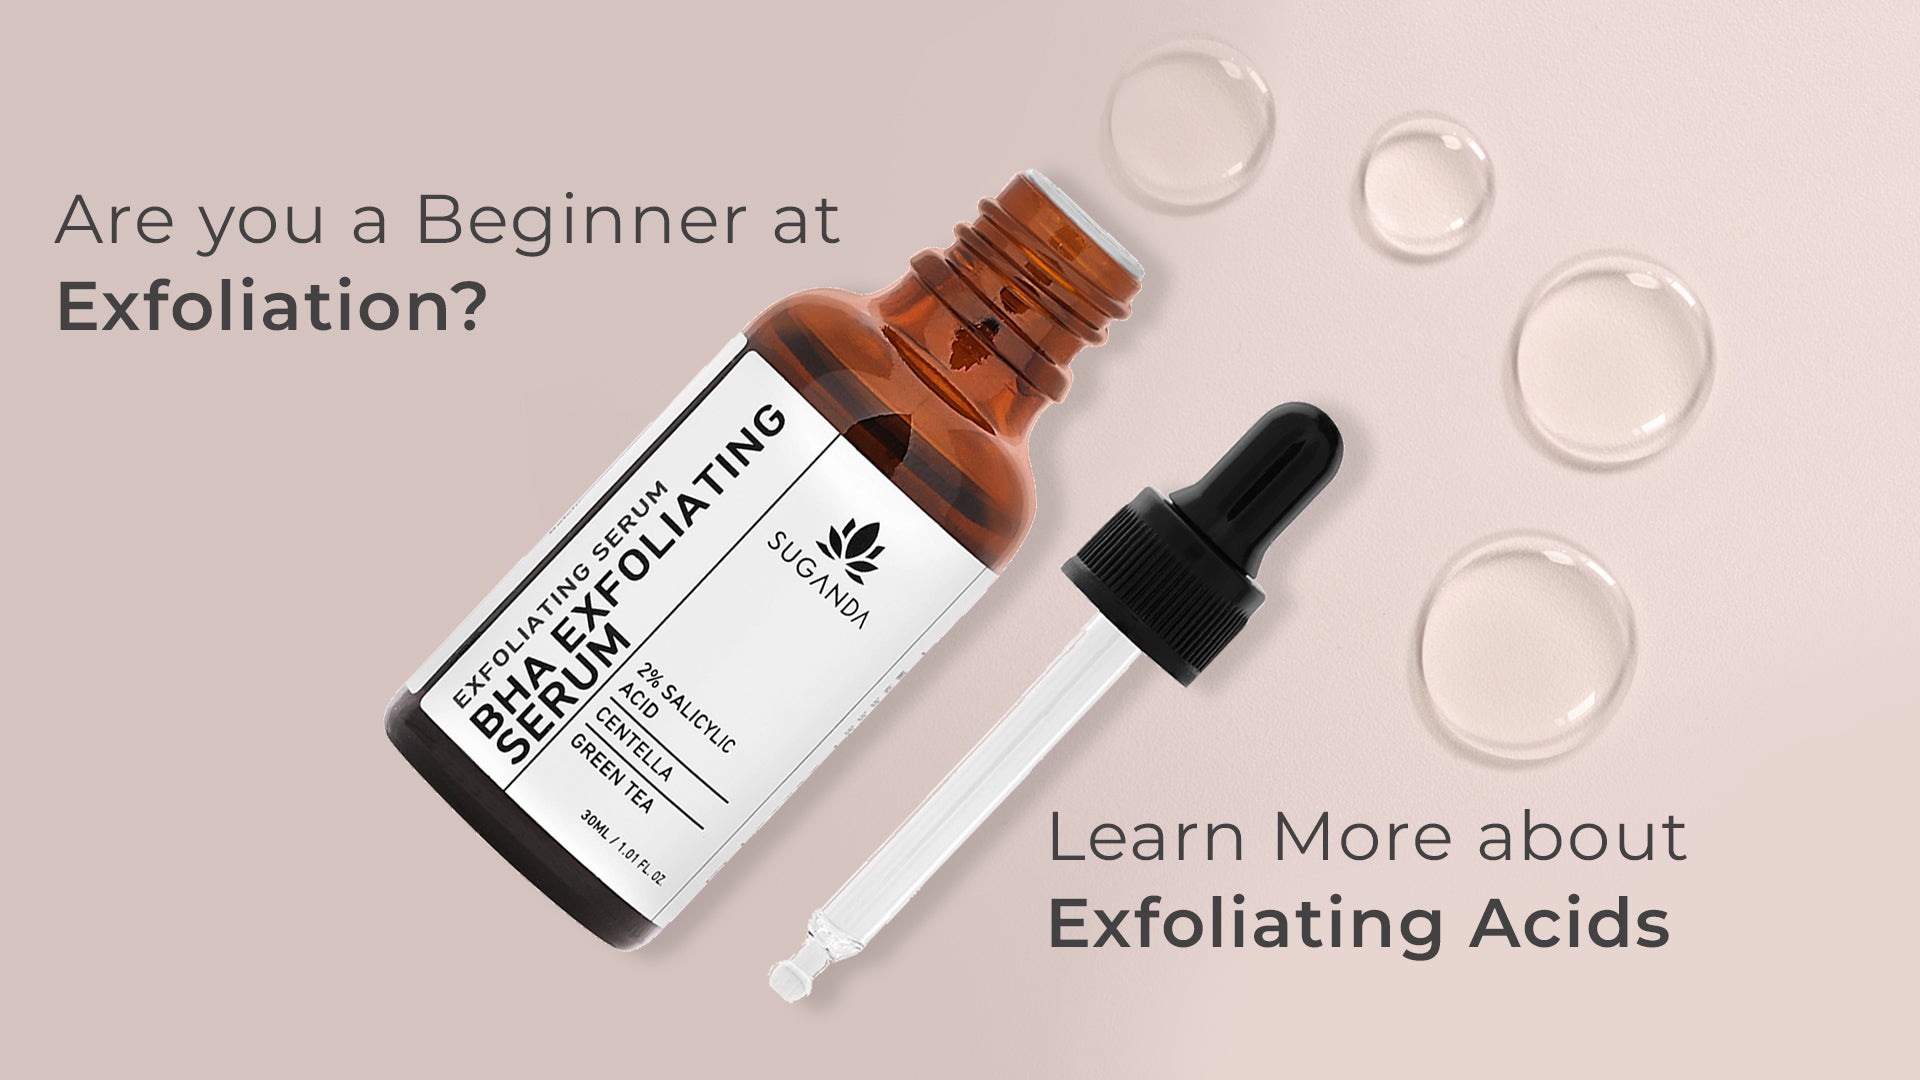 Learn More about Exfoliating Acids